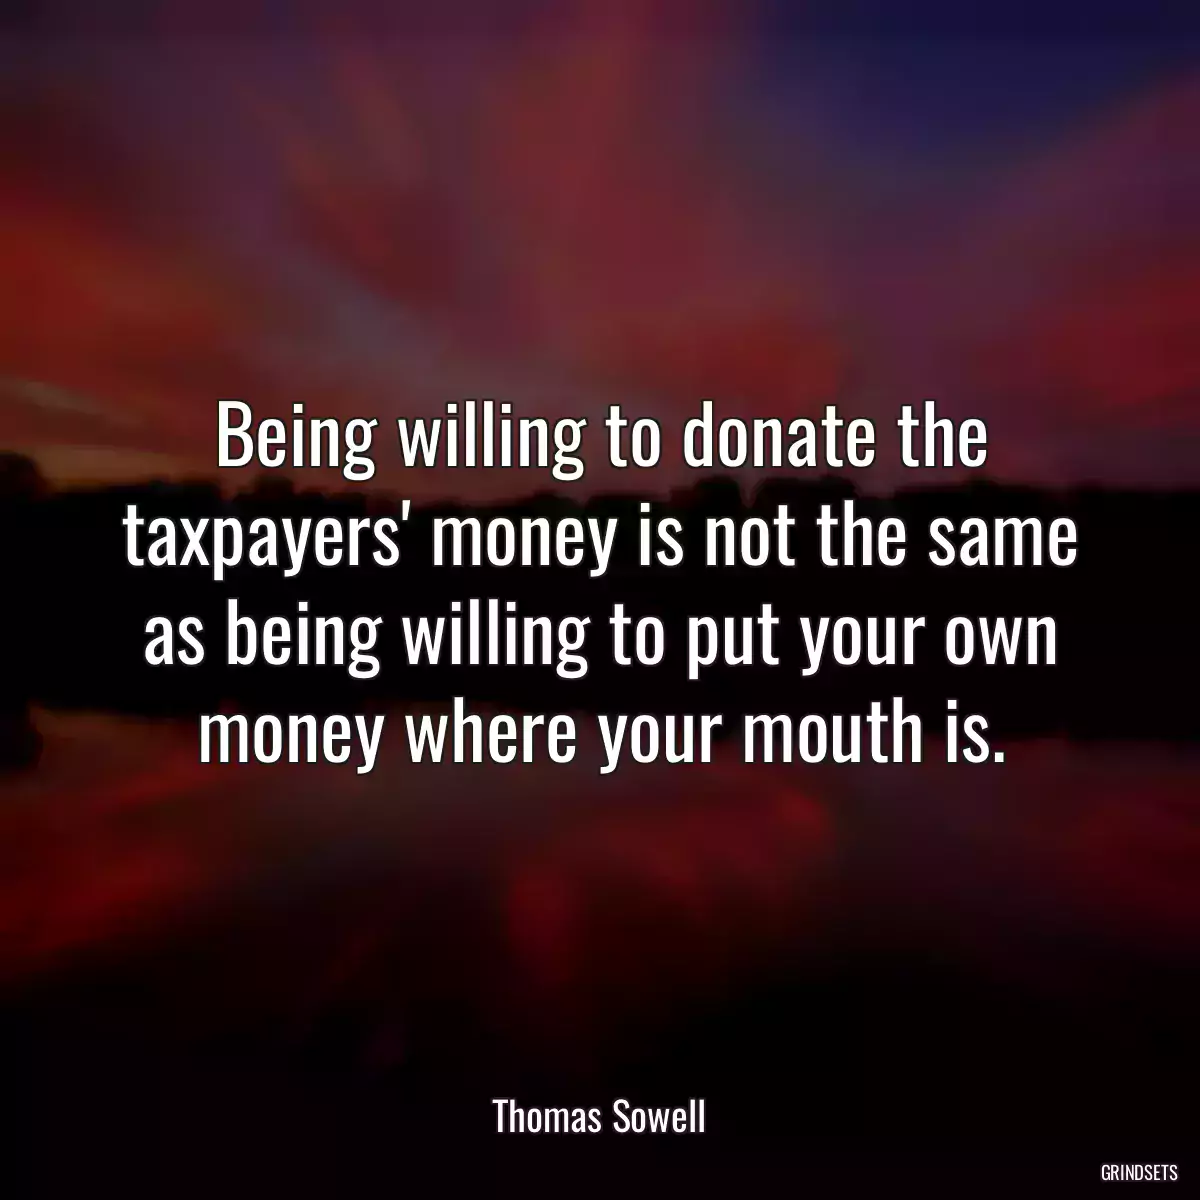 Being willing to donate the taxpayers\' money is not the same as being willing to put your own money where your mouth is.